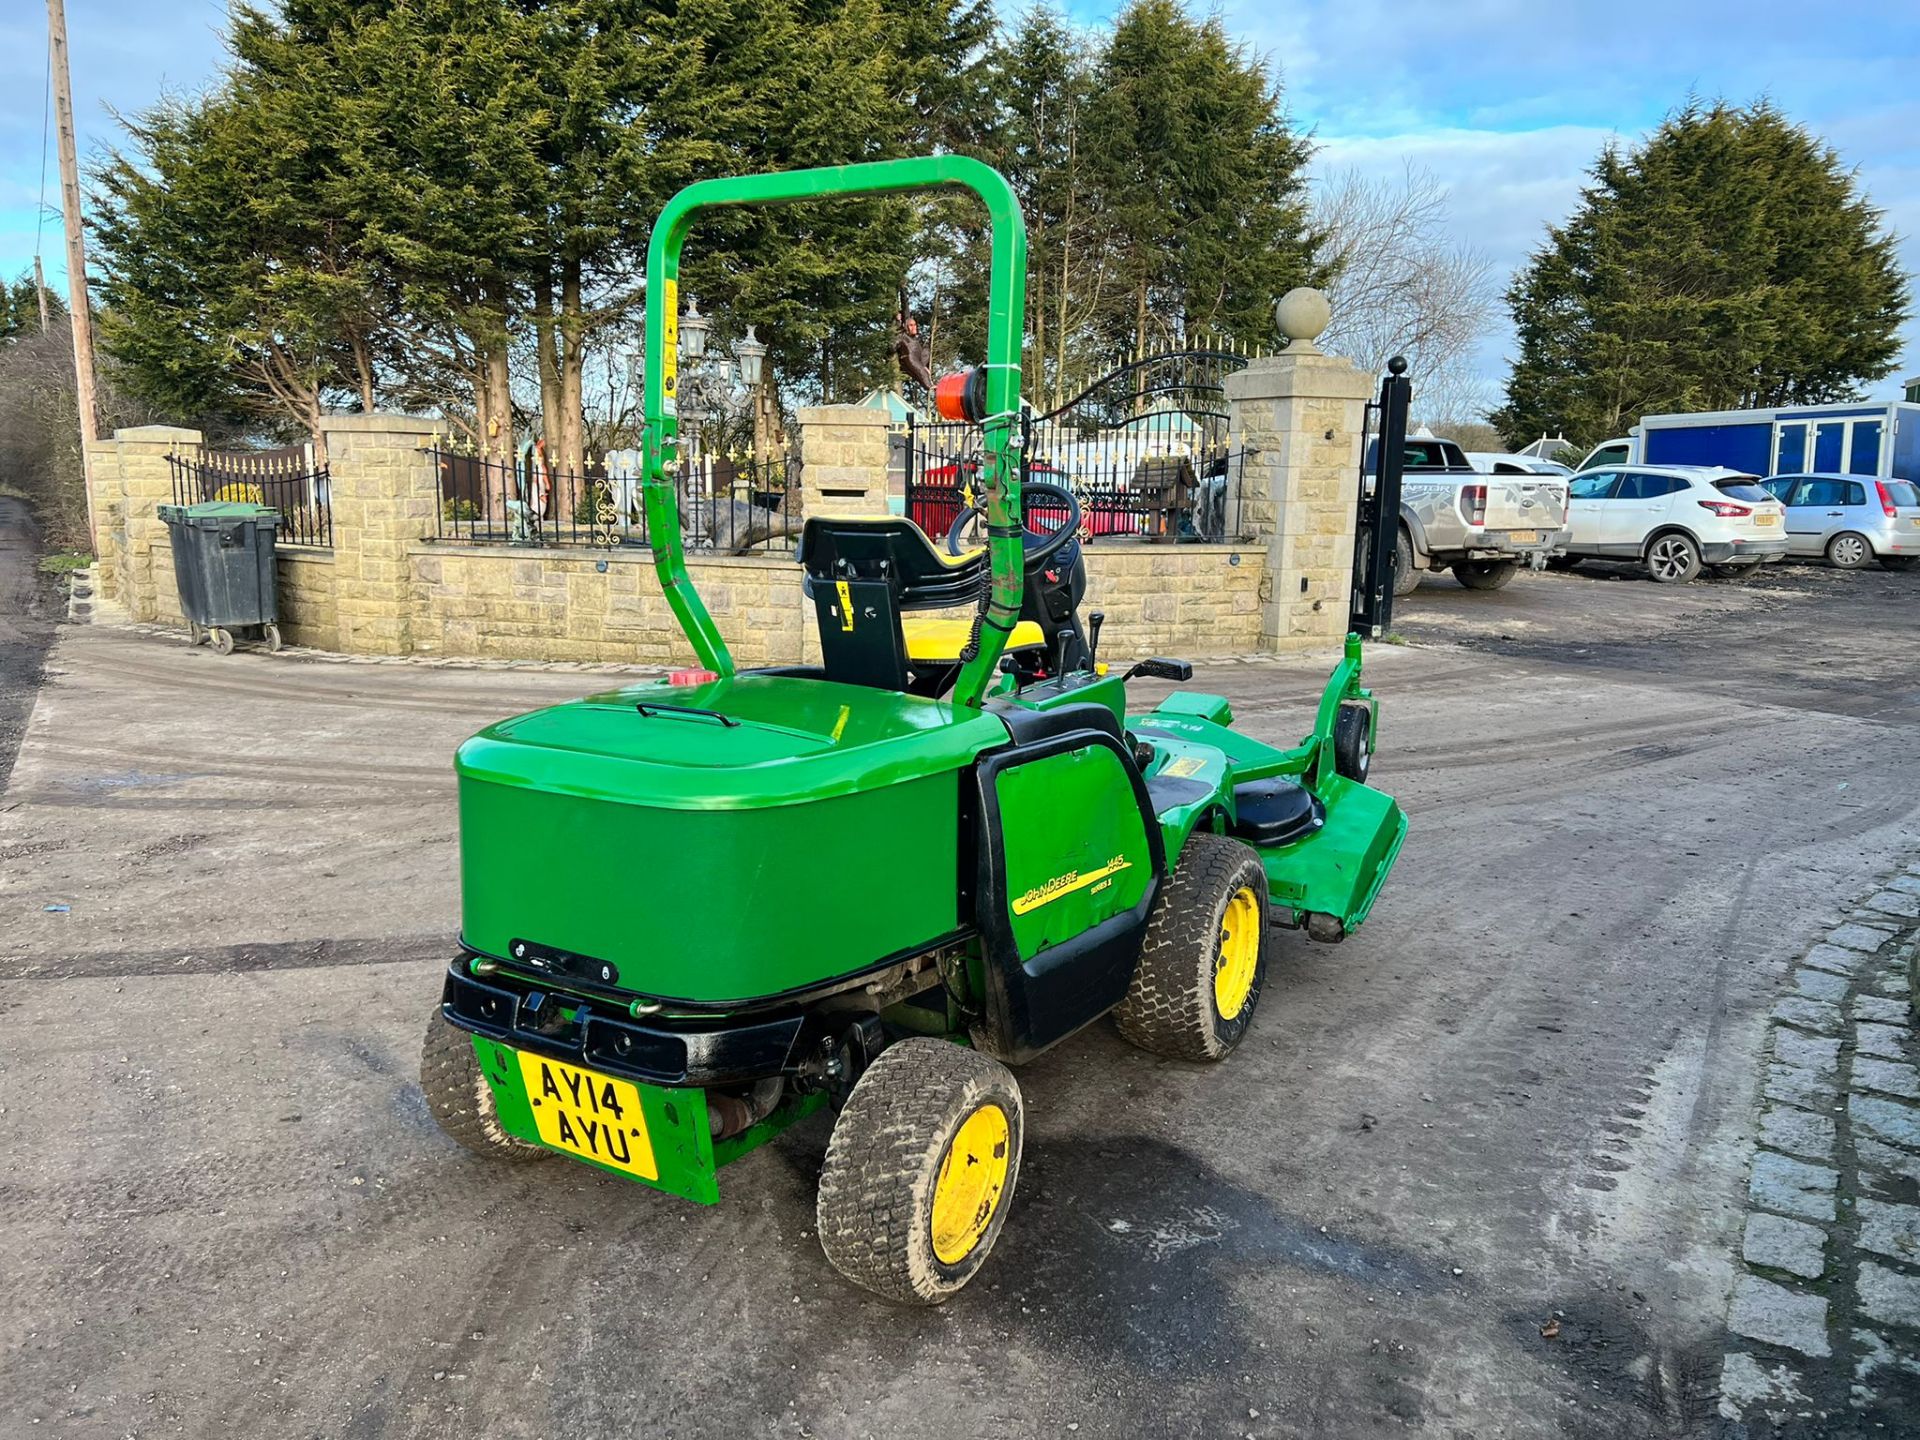 2014 JOHN DEERE 1445 4WD RIDE ON MOWER, RUNS DRIVES AND CUTS, SHOWING A LOW 2956 HOURS *PLUS VAT* - Image 5 of 10